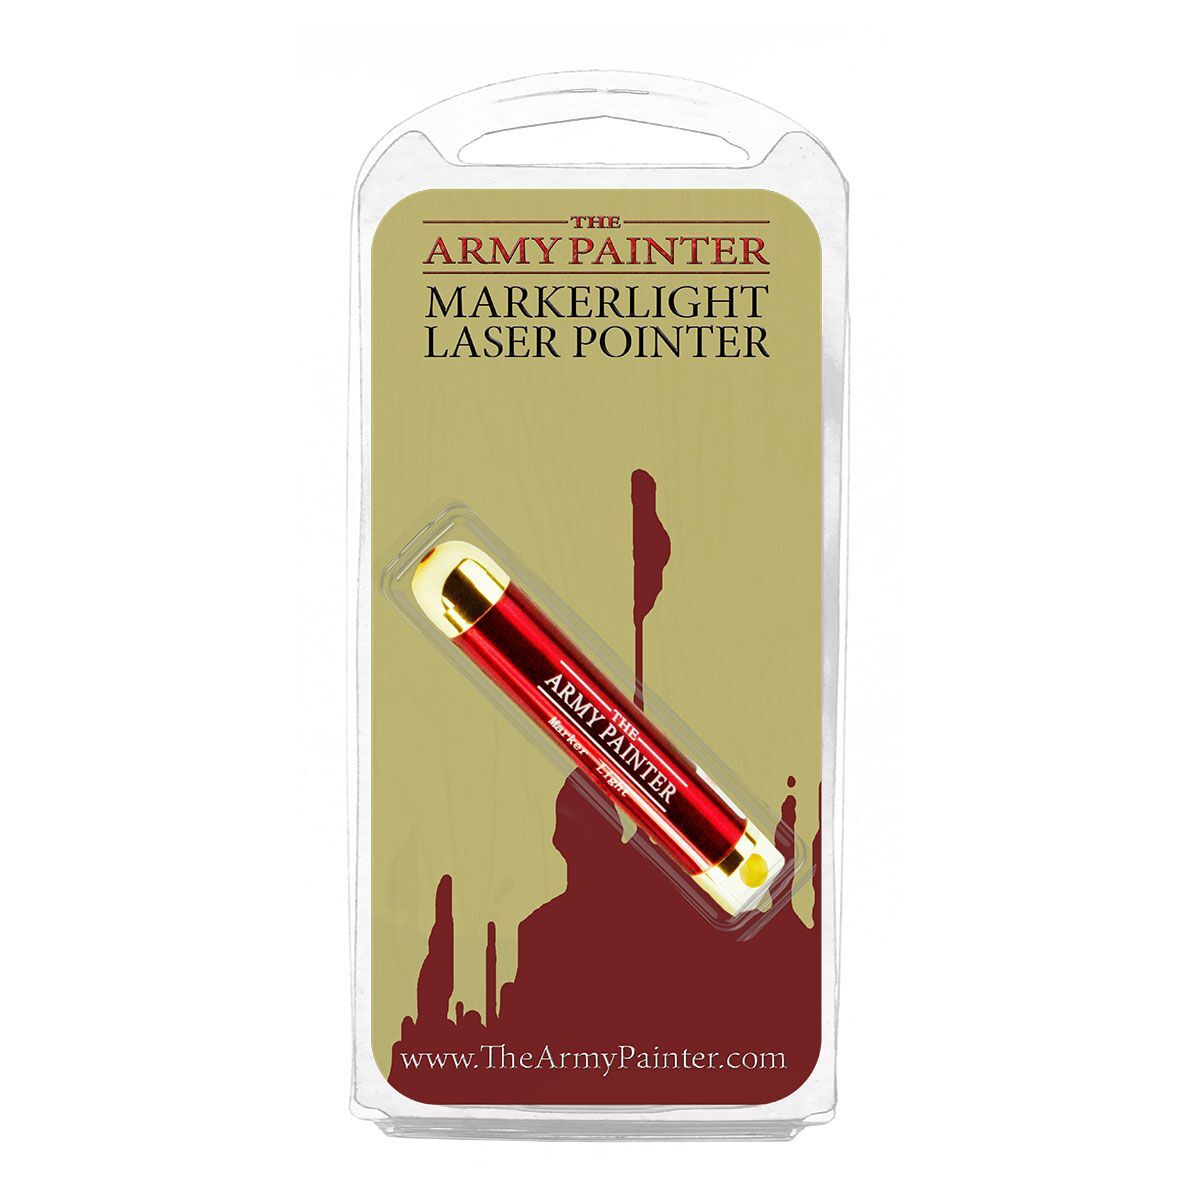 The Army Painter Miniature & Model Markerlight Laser Pointer